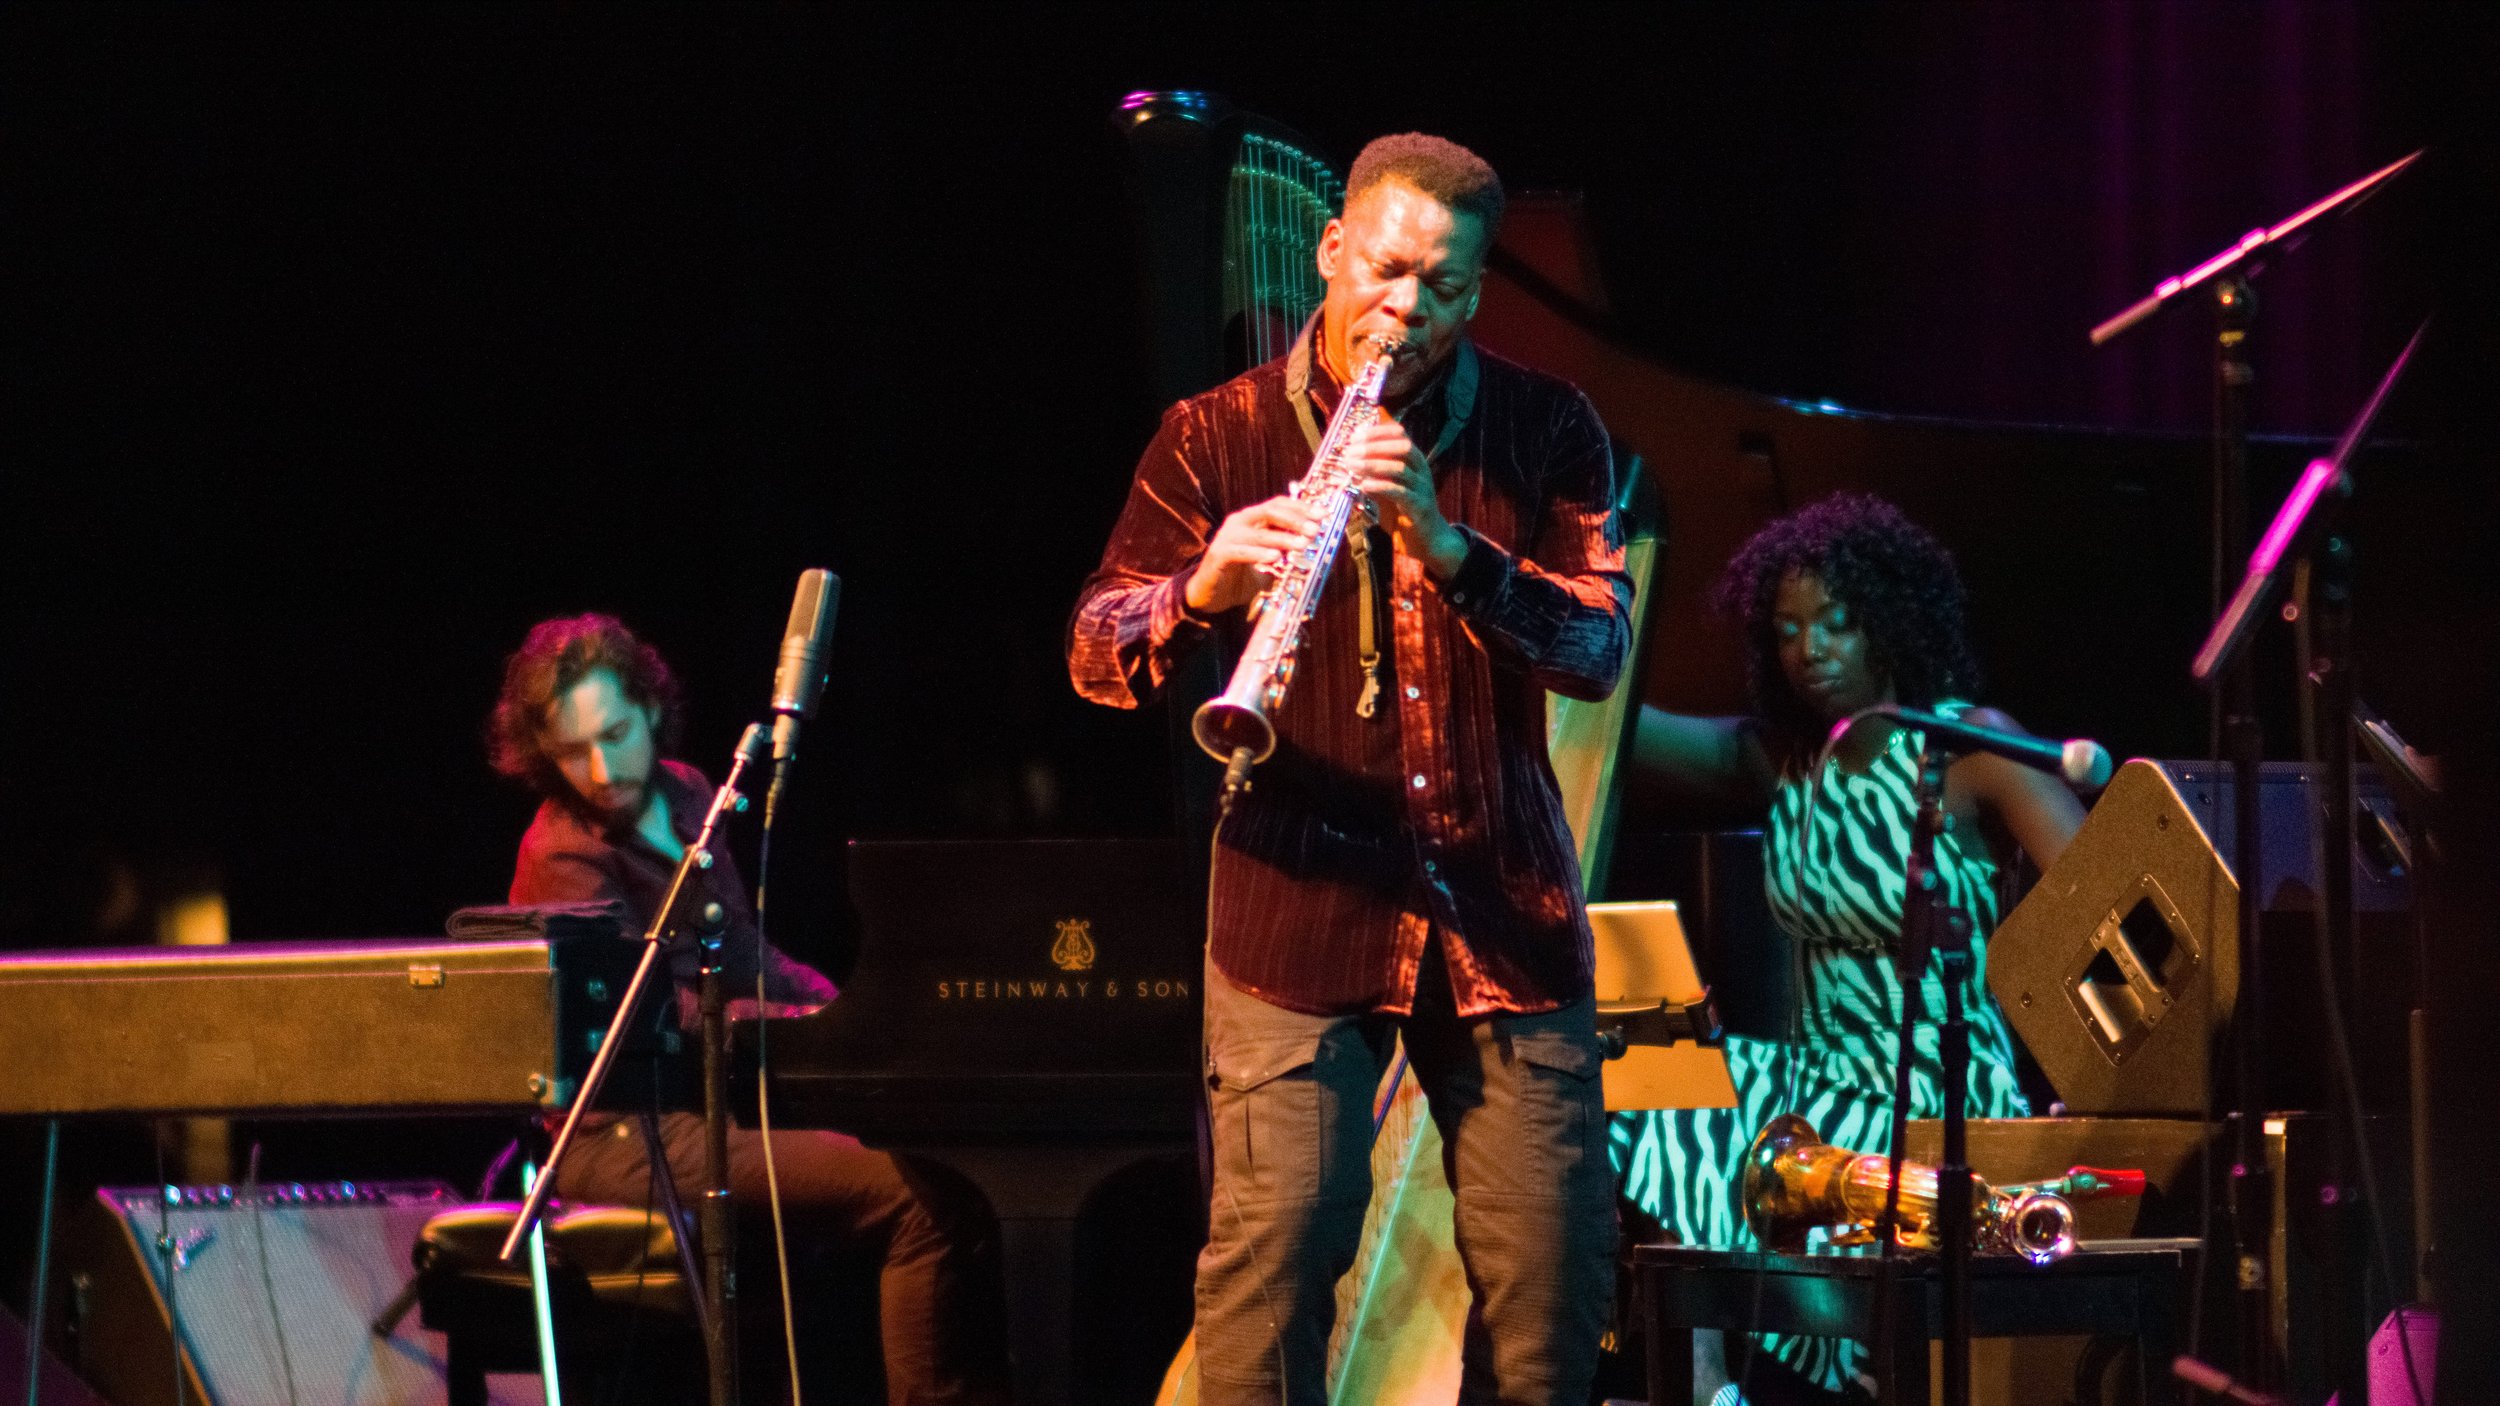  Gadi Lehavi (left) with Ravi Coltrane (center) and Brandee Younger (right) play at the Santa Monica College Performing Arts Center, Santa Monica, Calif. as part of Ravi Coltrane's group on It was the birthday of Ravi Coltrane's late father John Colt